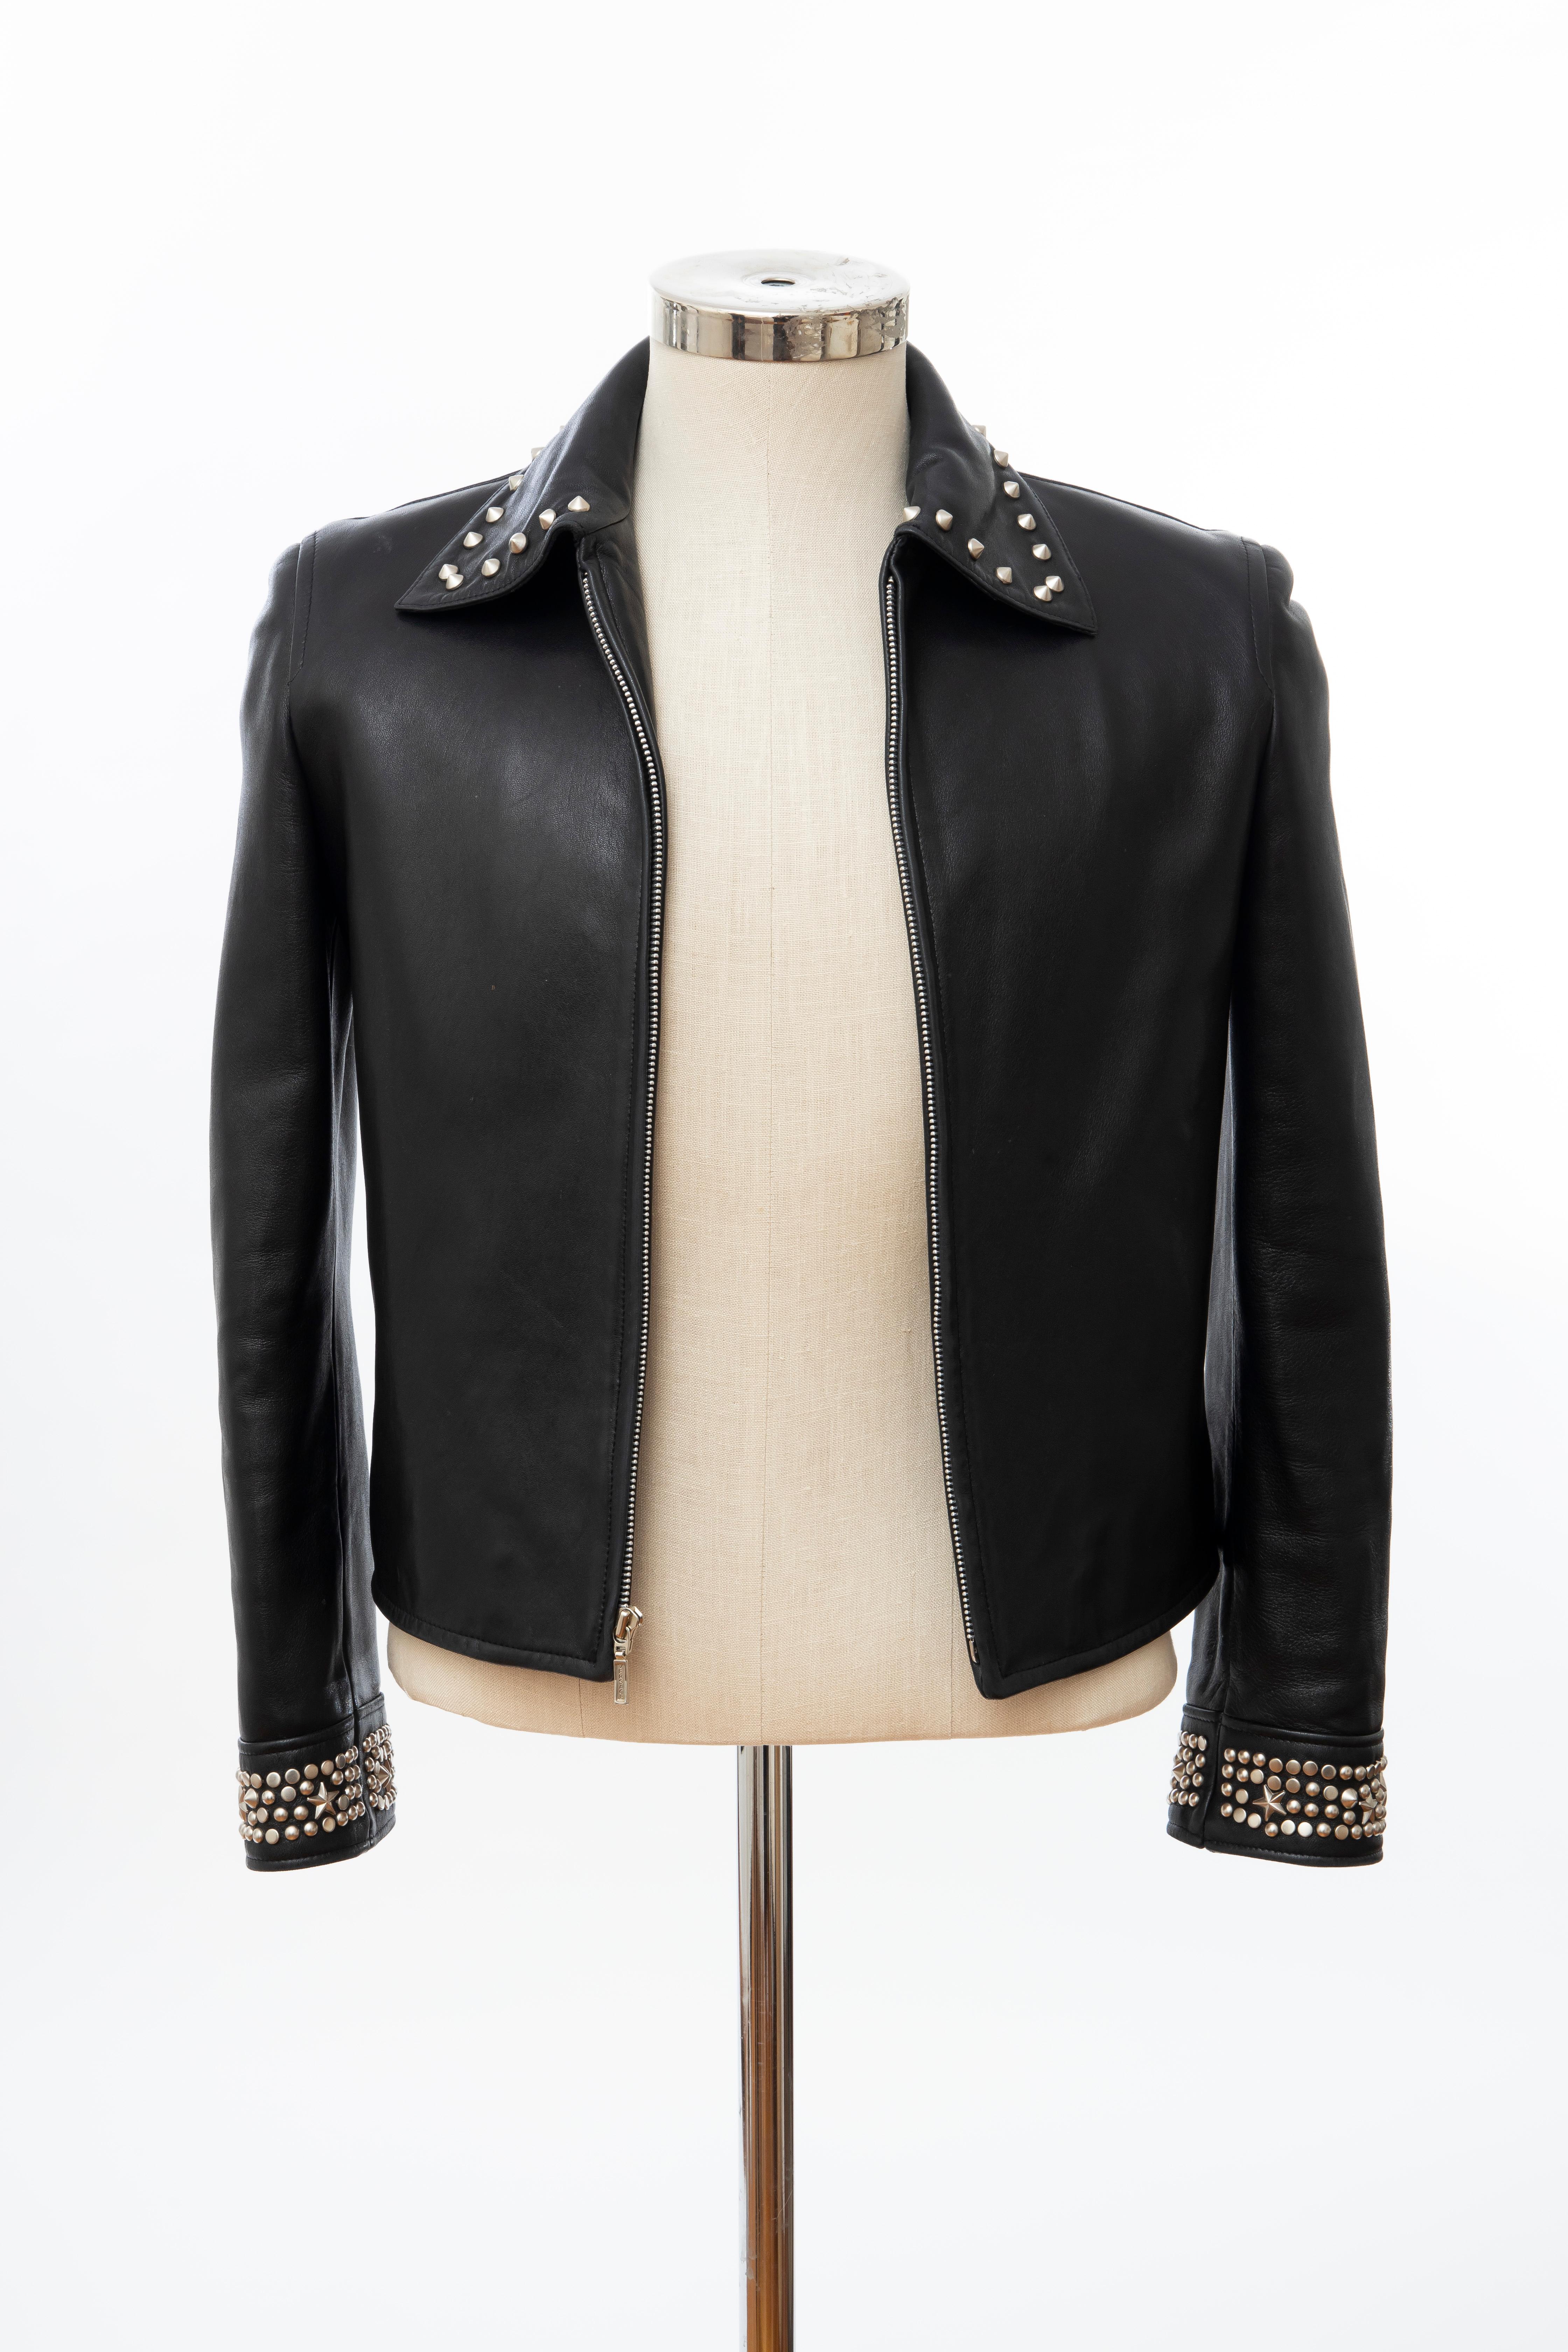 Gianni Versace Black Leather Jacket Pewter Stud Collar & Cuffs,  Circa: 1990's For Sale 9